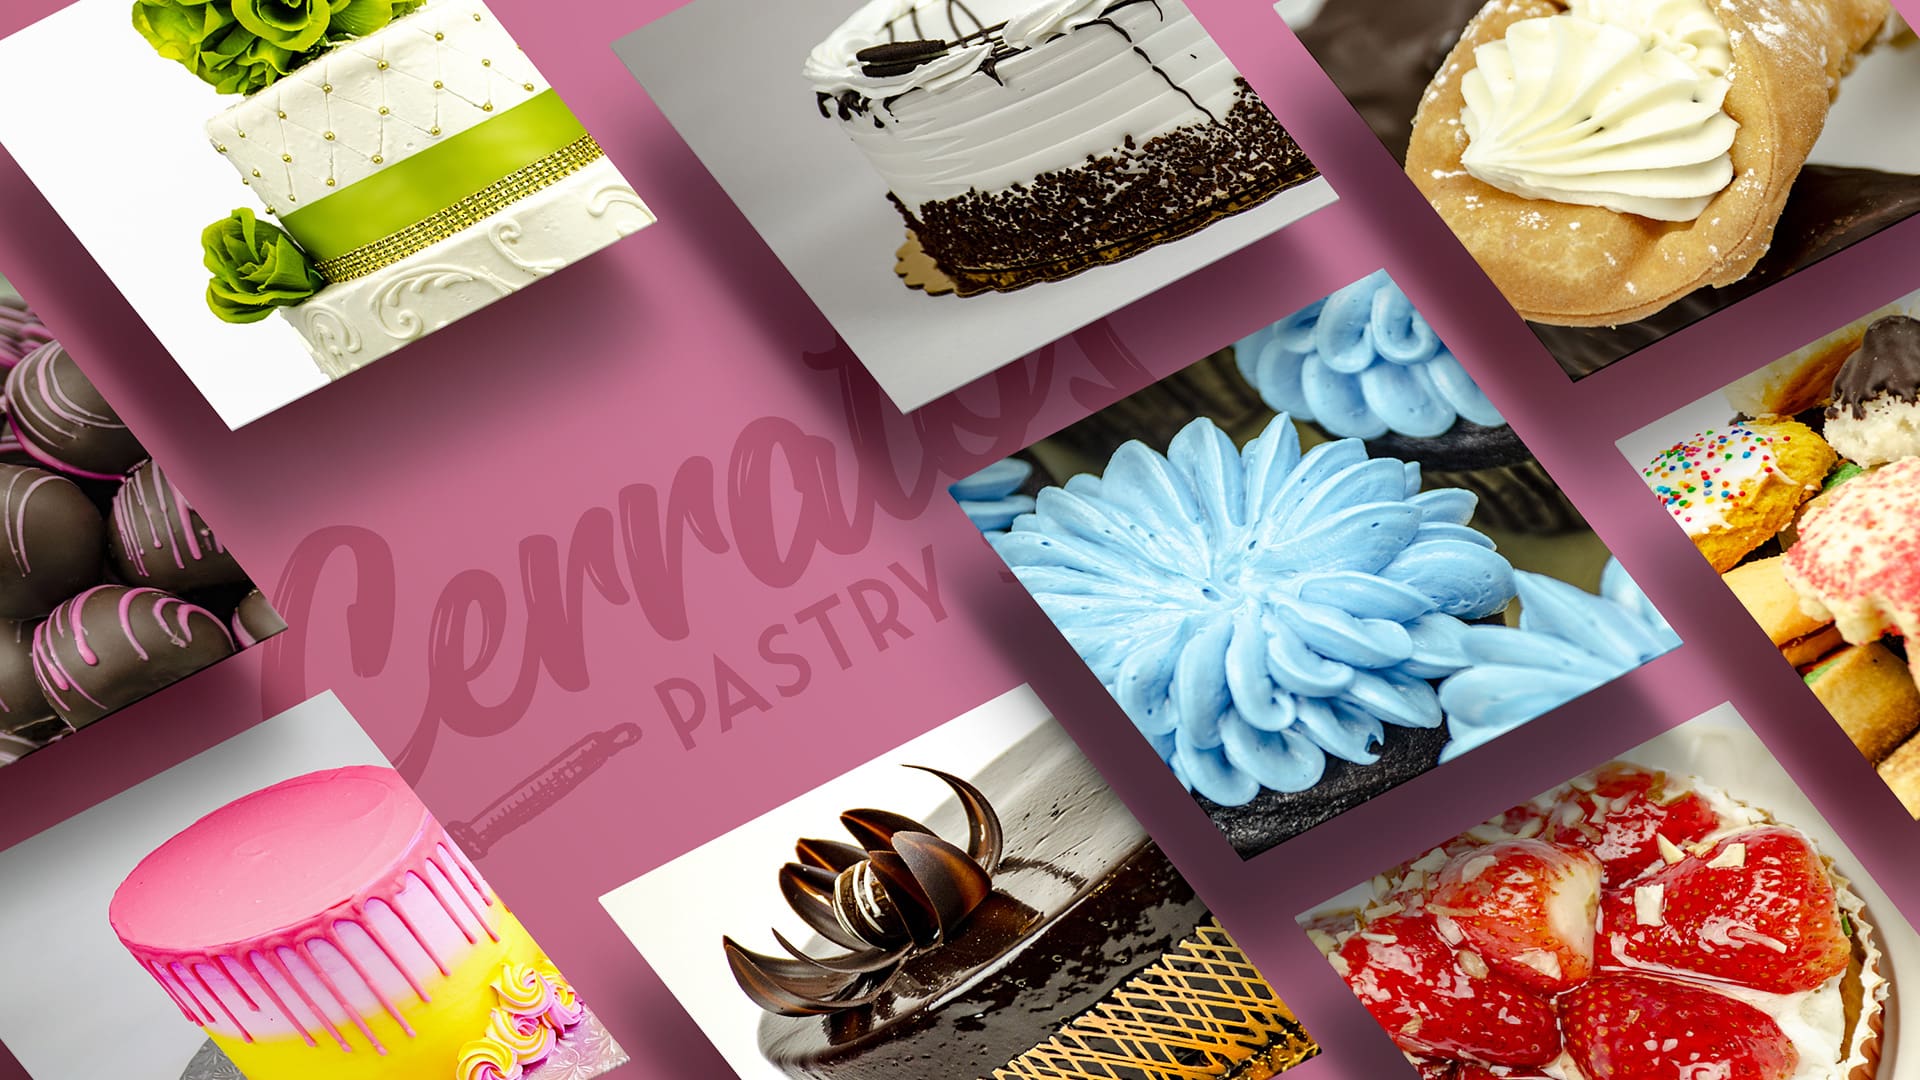 DIF Design Project - Cerrato’s Bakery product photography